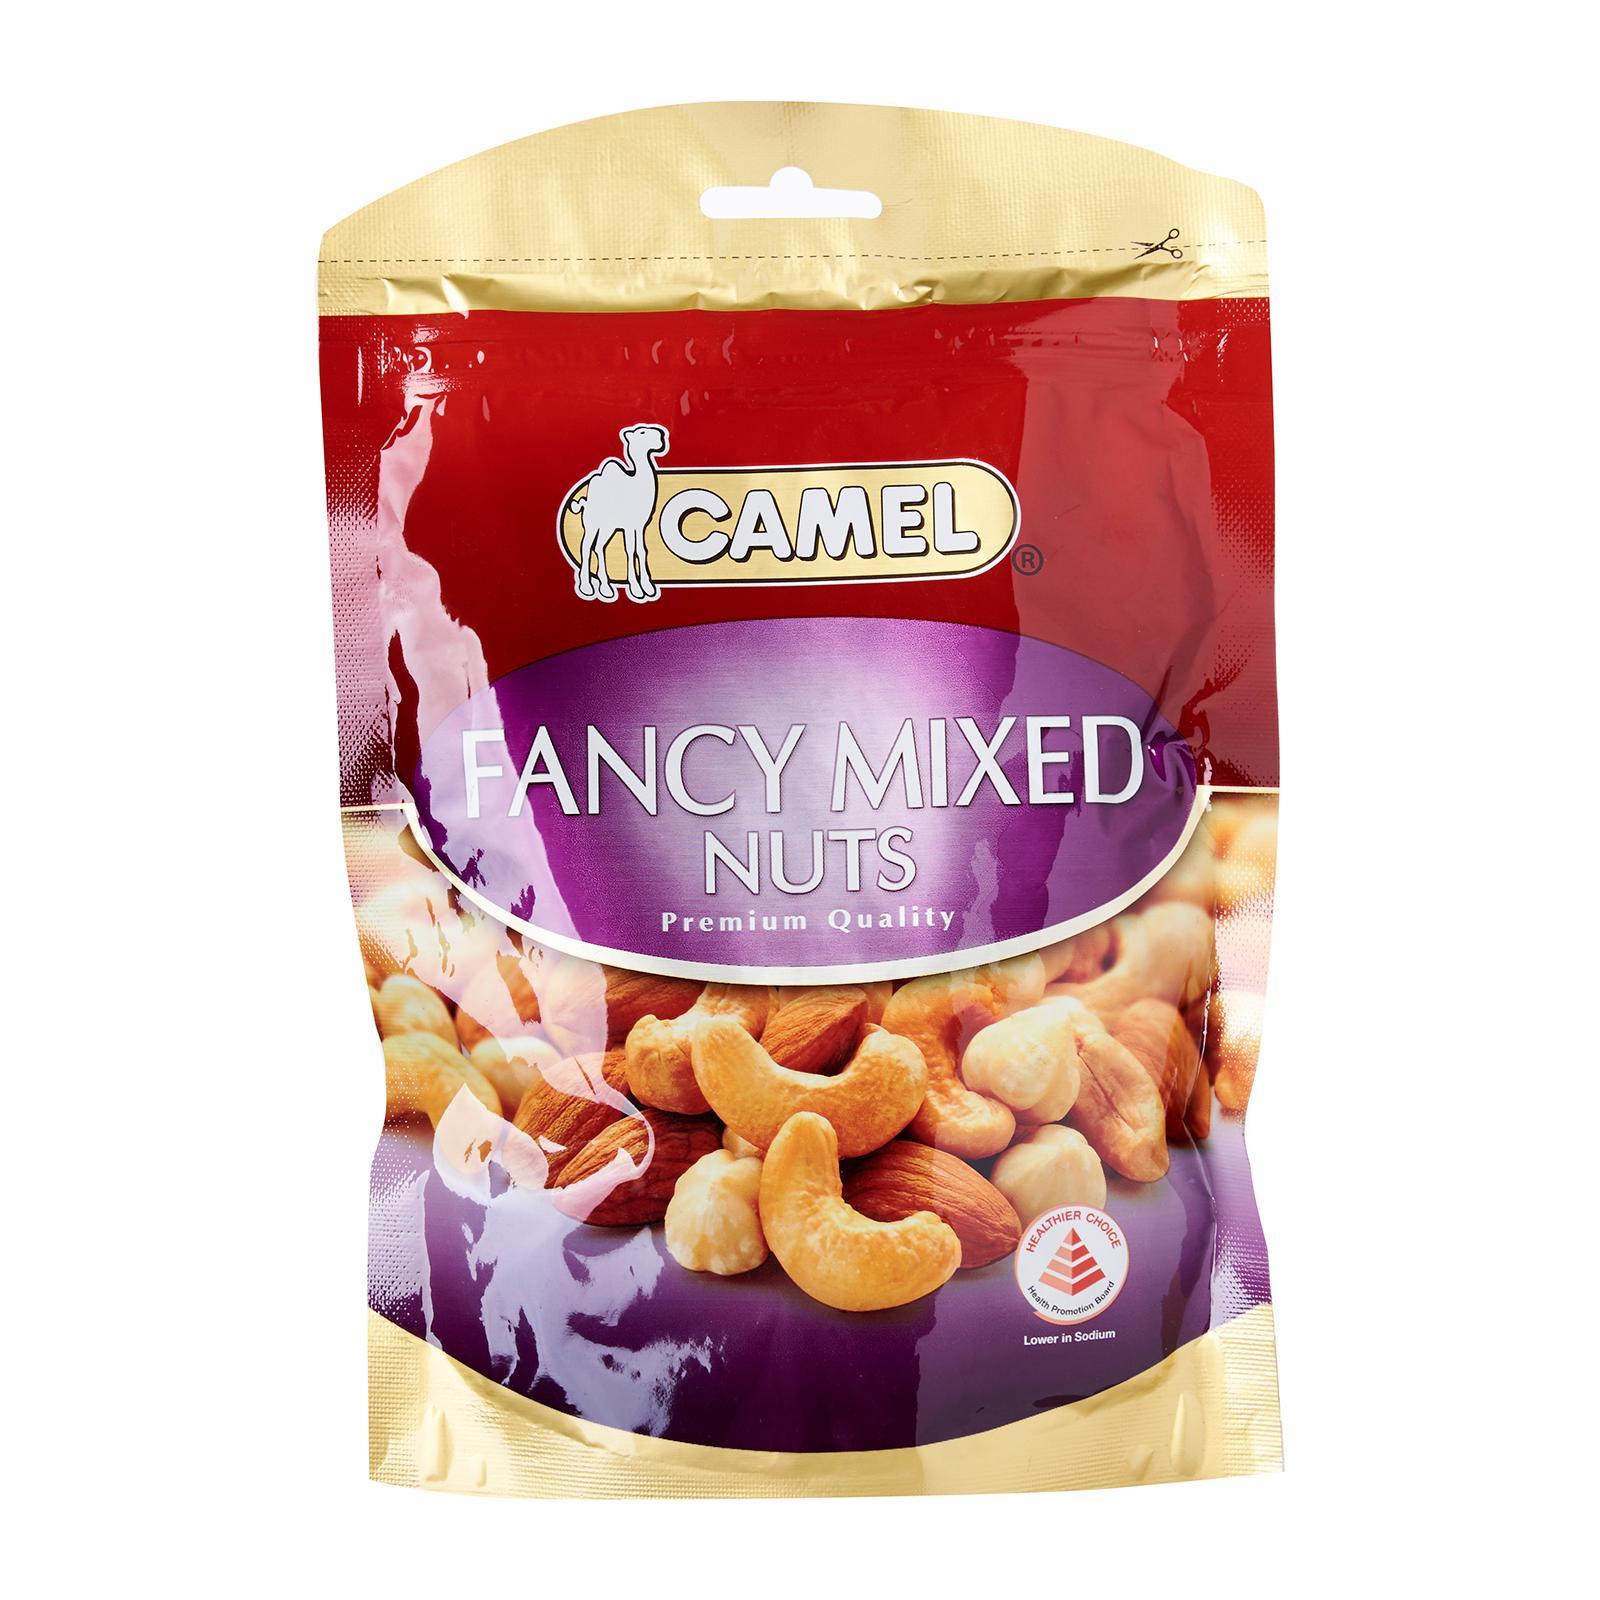 Camel Fancy Mix Nuts things to buy in Singapore